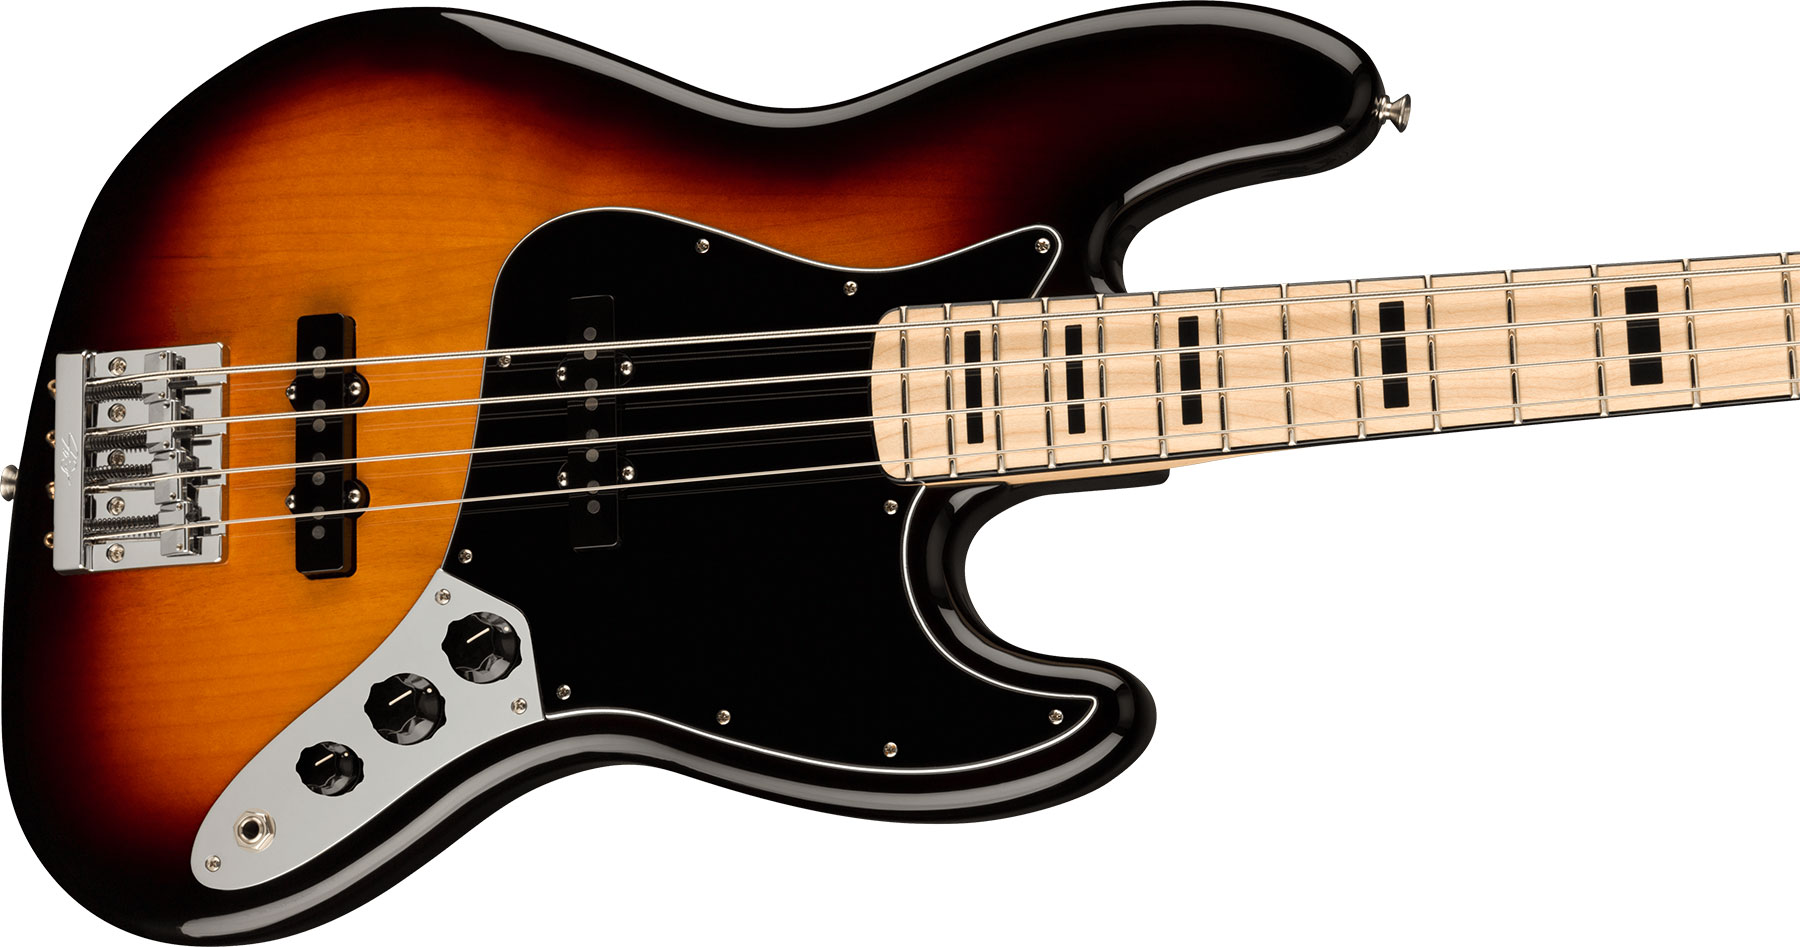 Fender Geddy Lee Jazz Bass Signature Mex Mn - 3-color Sunburst - Solid body electric bass - Variation 2